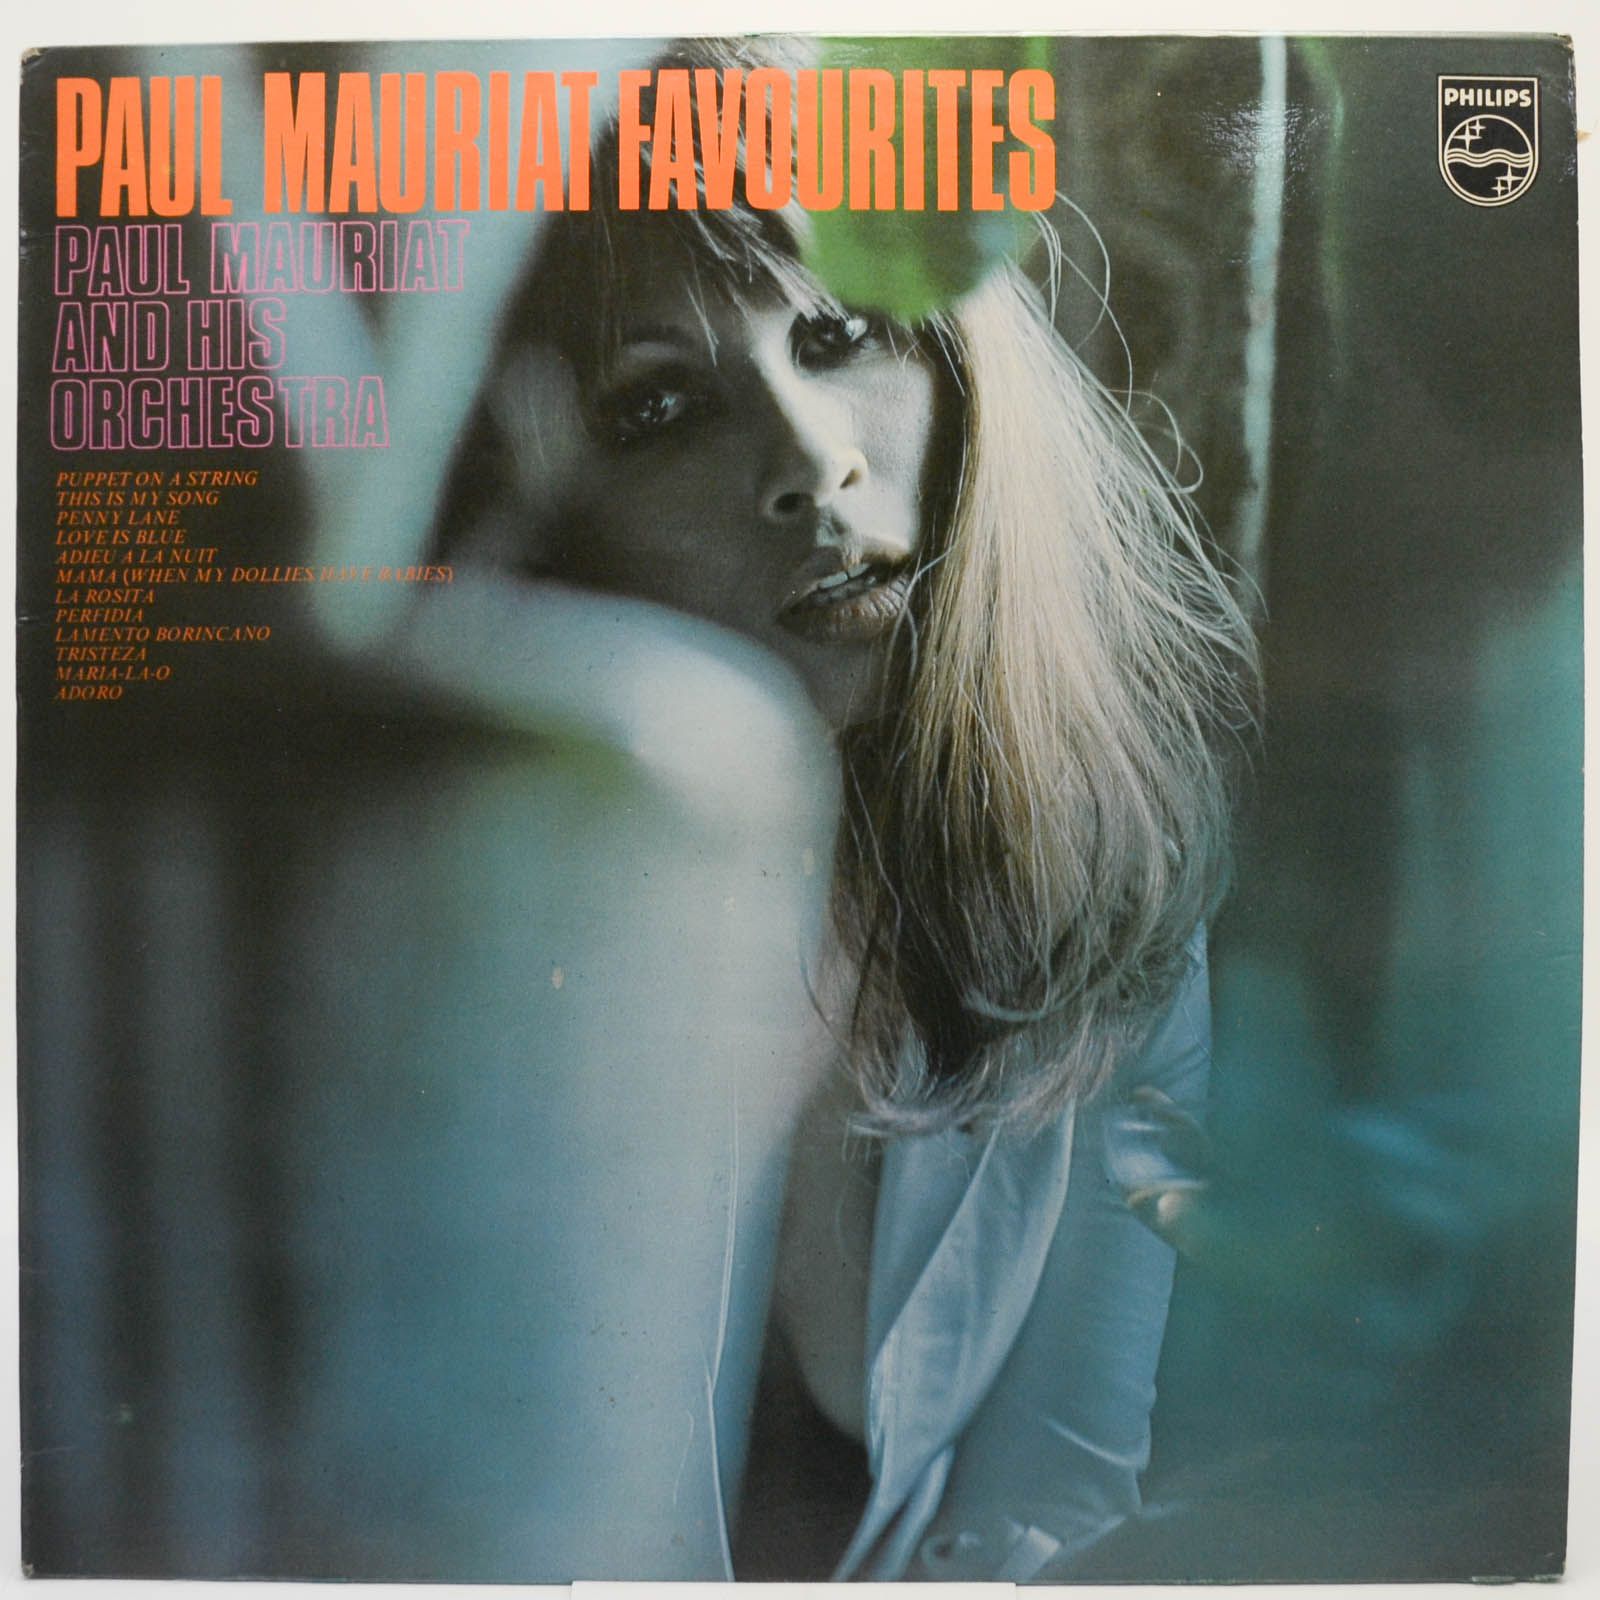 Paul Mauriat And His Orchestra — Paul Mauriat Favourites (UK), 1968